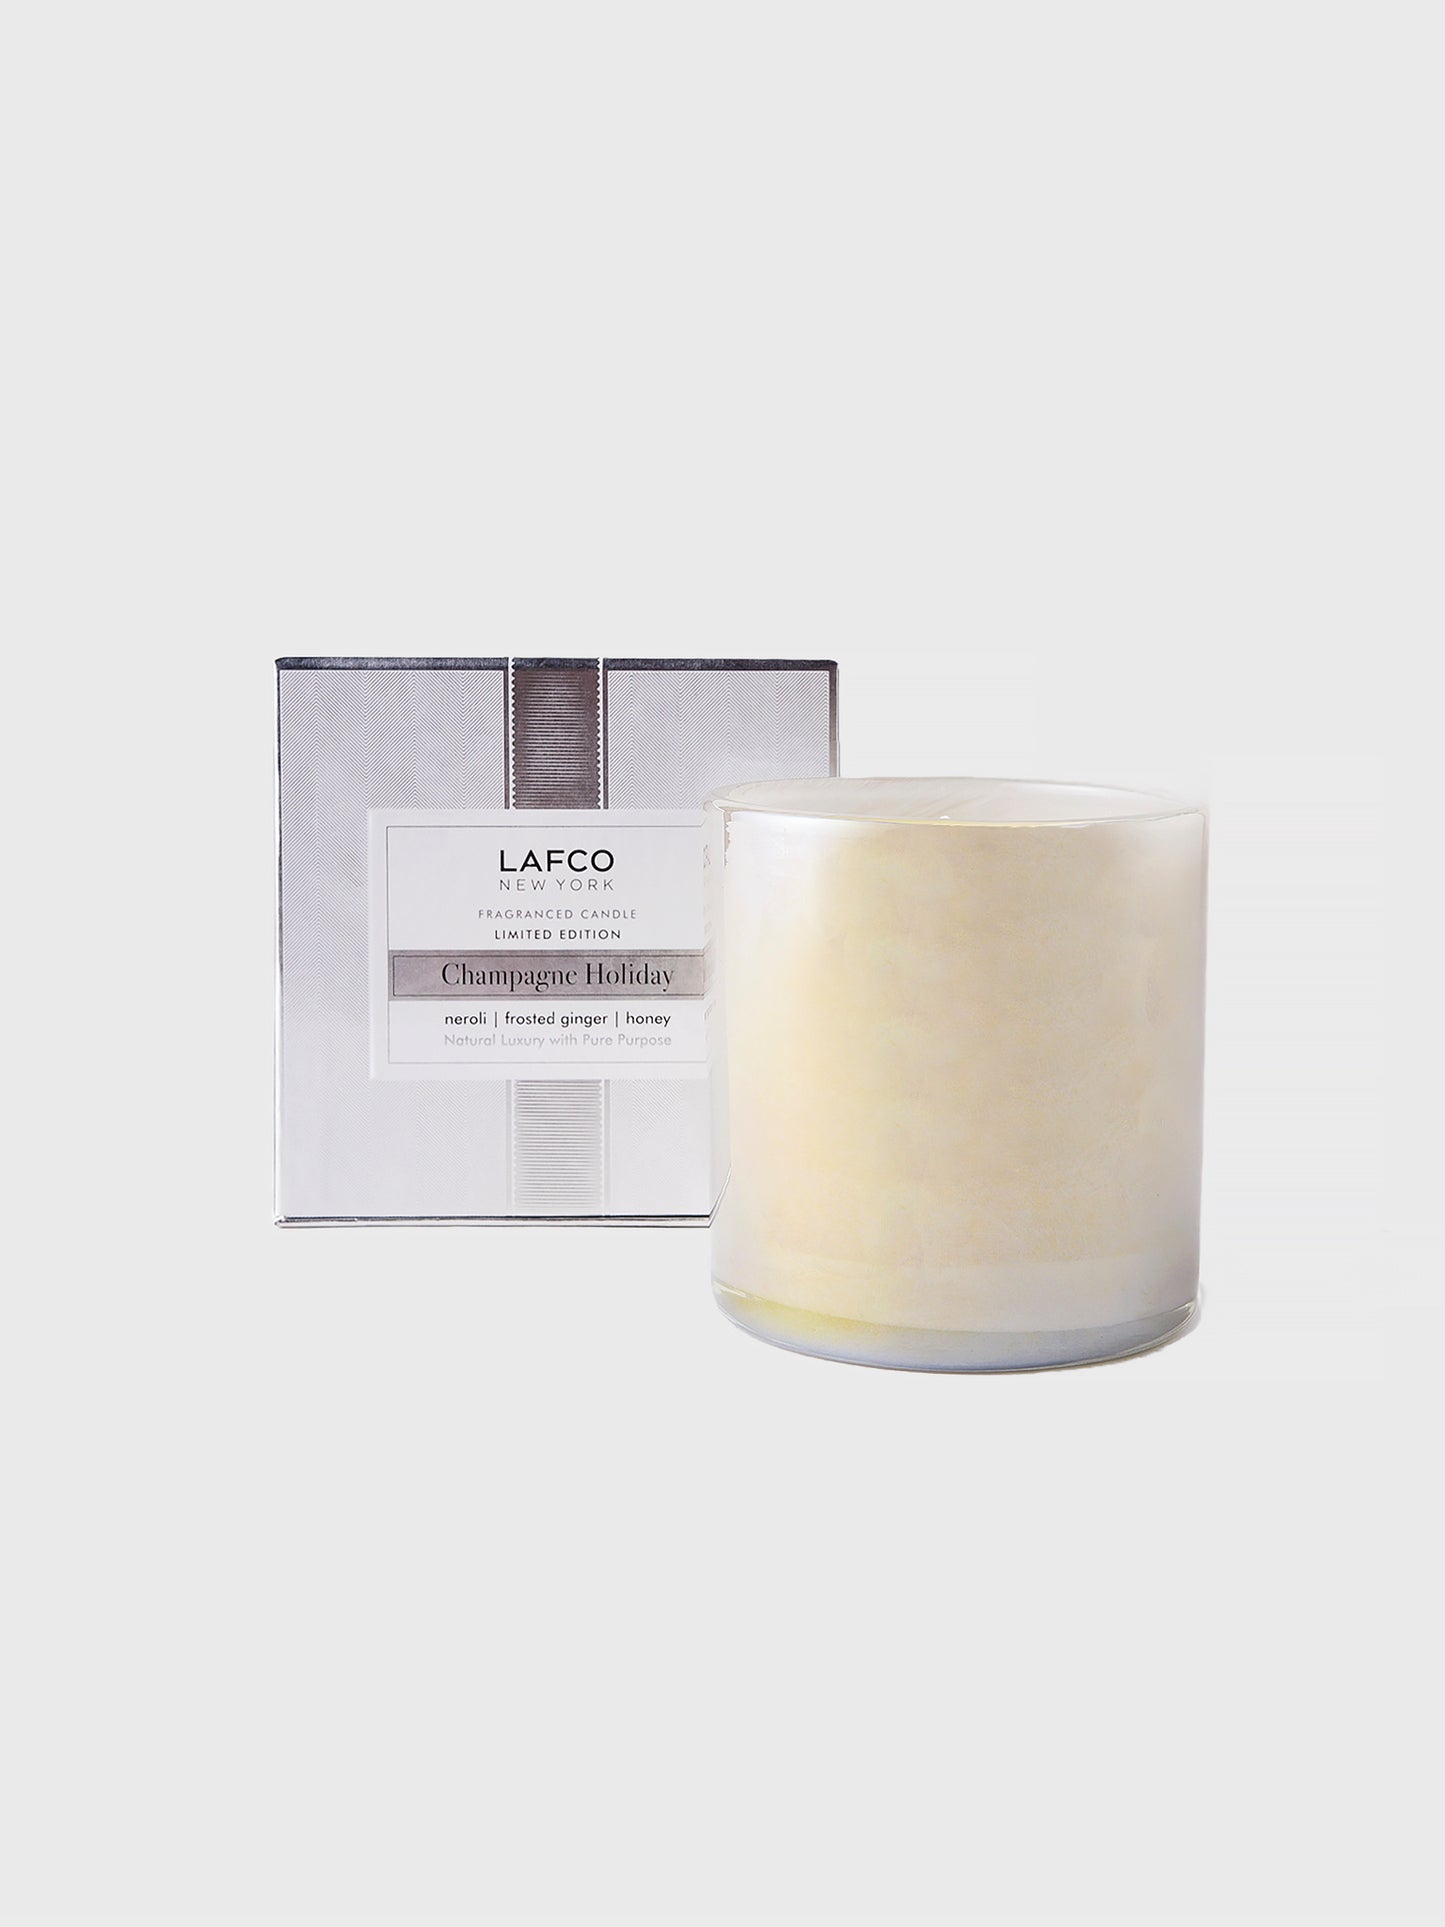 Lafco Champagne Holiday Candle